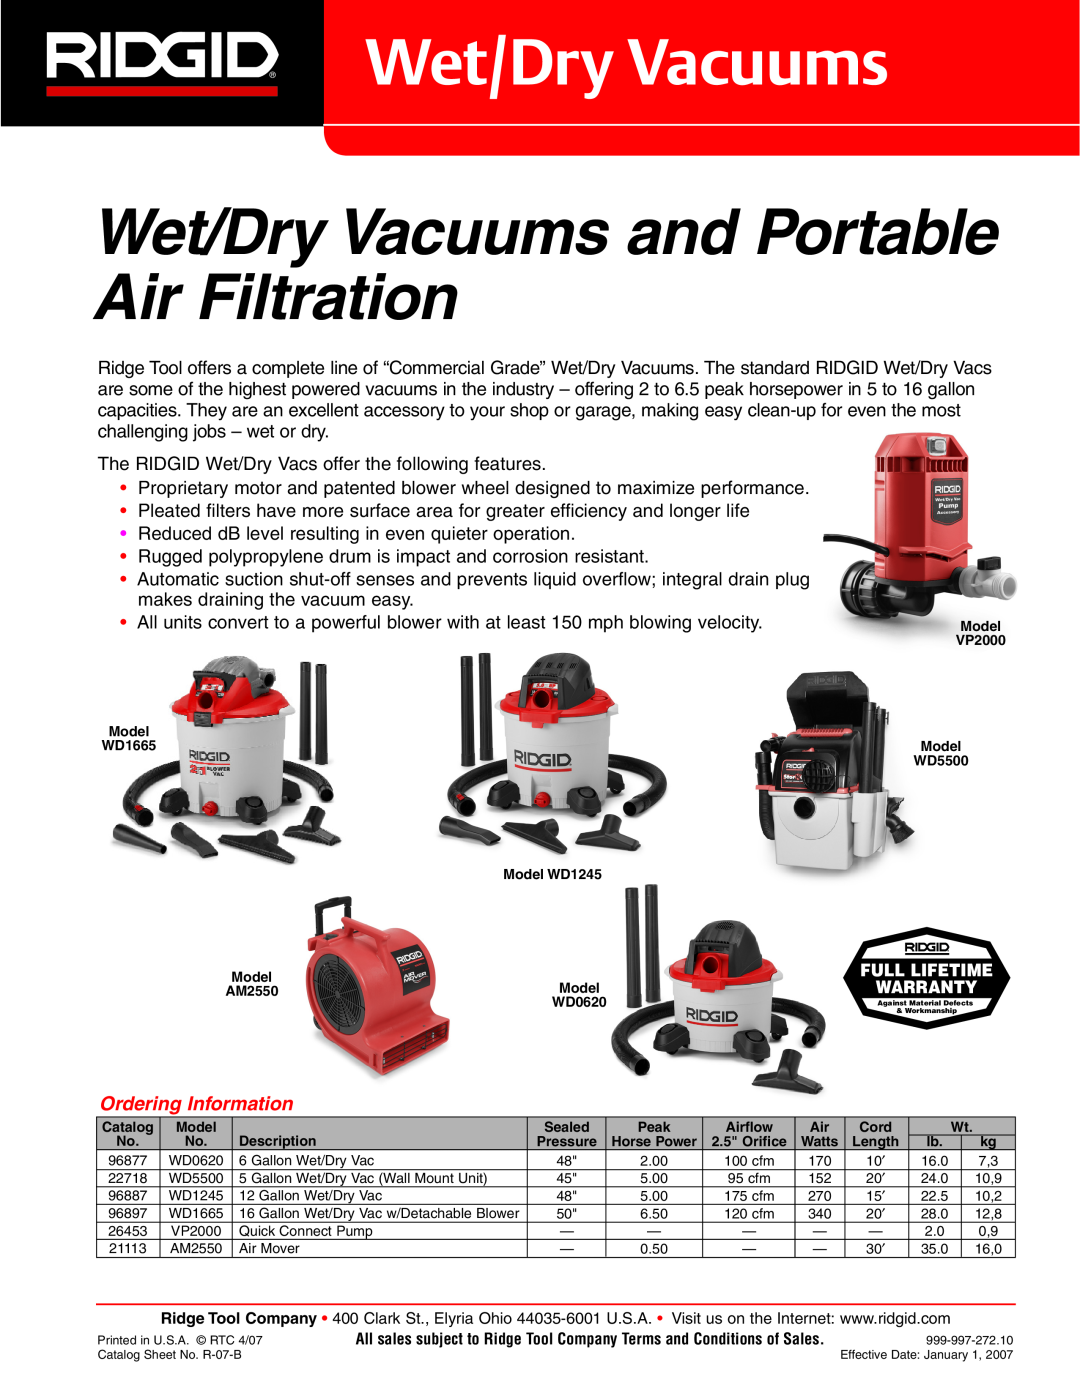 RIDGID AM2550 warranty Wet/Dry Vacuums and Portable Air Filtration, Ordering Information 